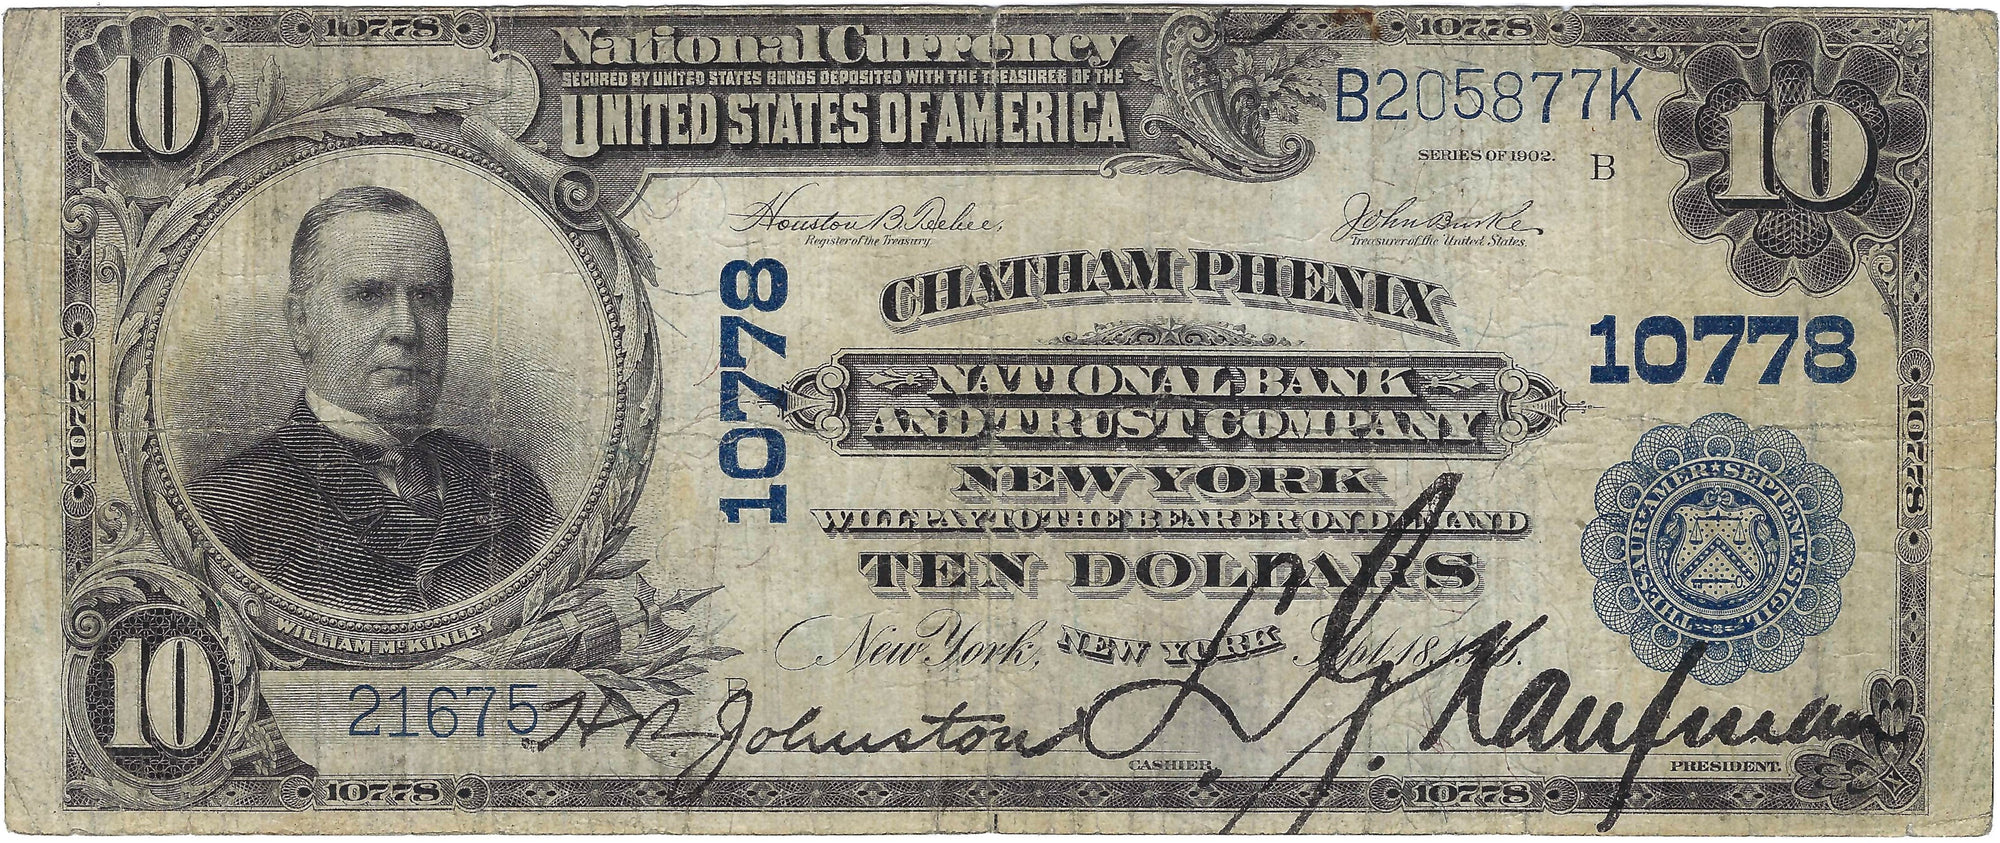 1902 $10 Large size National Bank Note, NB & Trust Co., Catham Phenix NY, Circulated